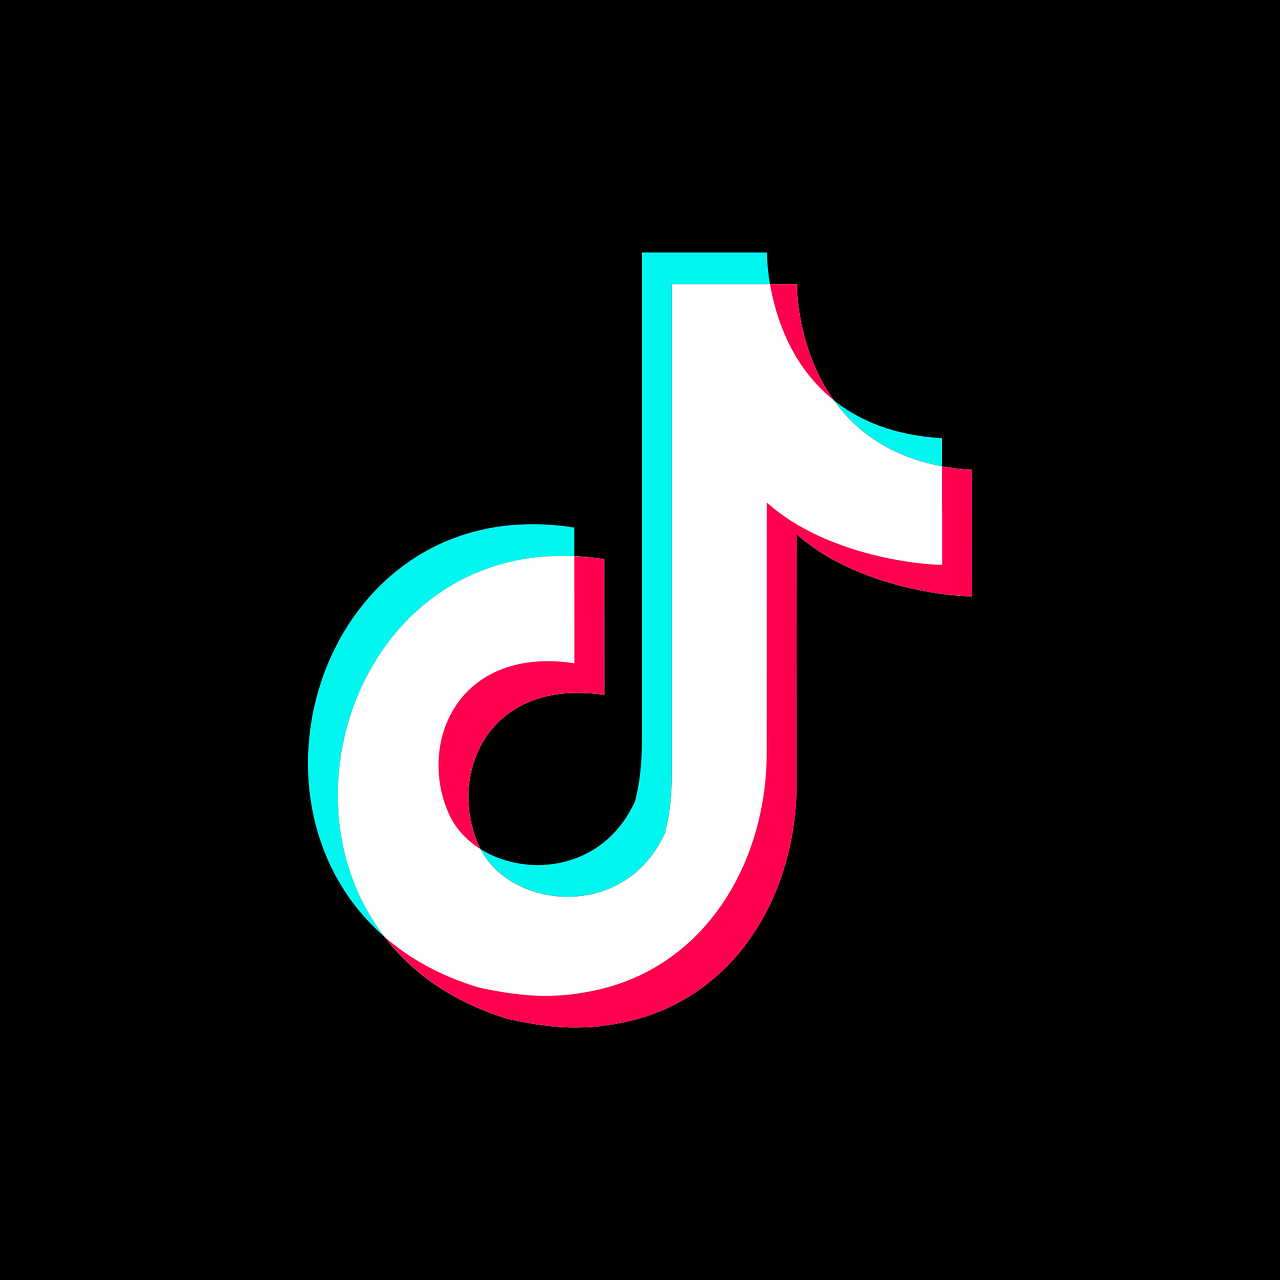 TikTok is simply the leading app for mobile videos